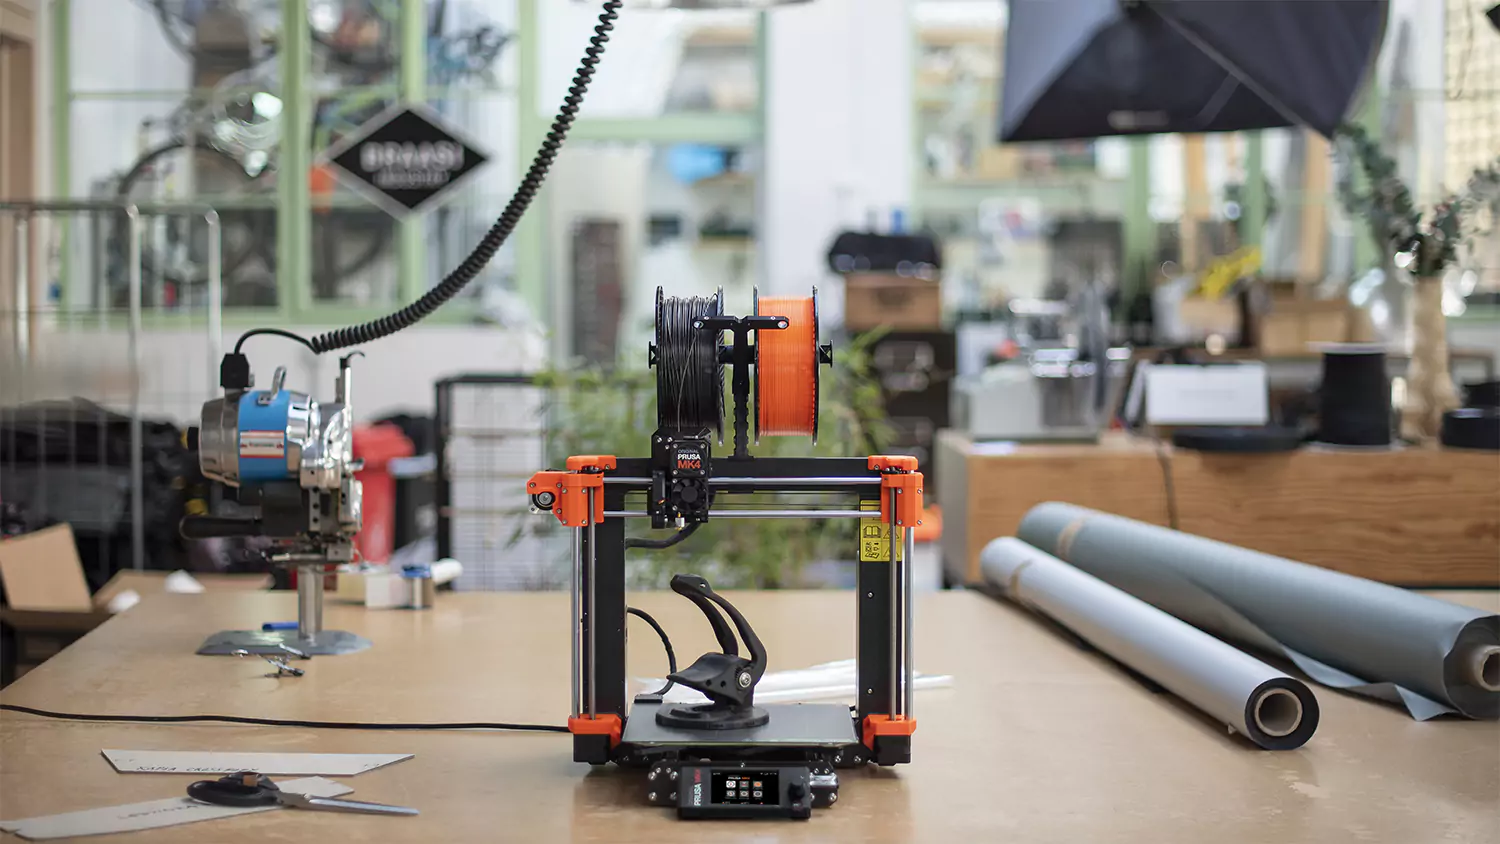 Prusa MK4 3D Printer widely used in Manufacturing